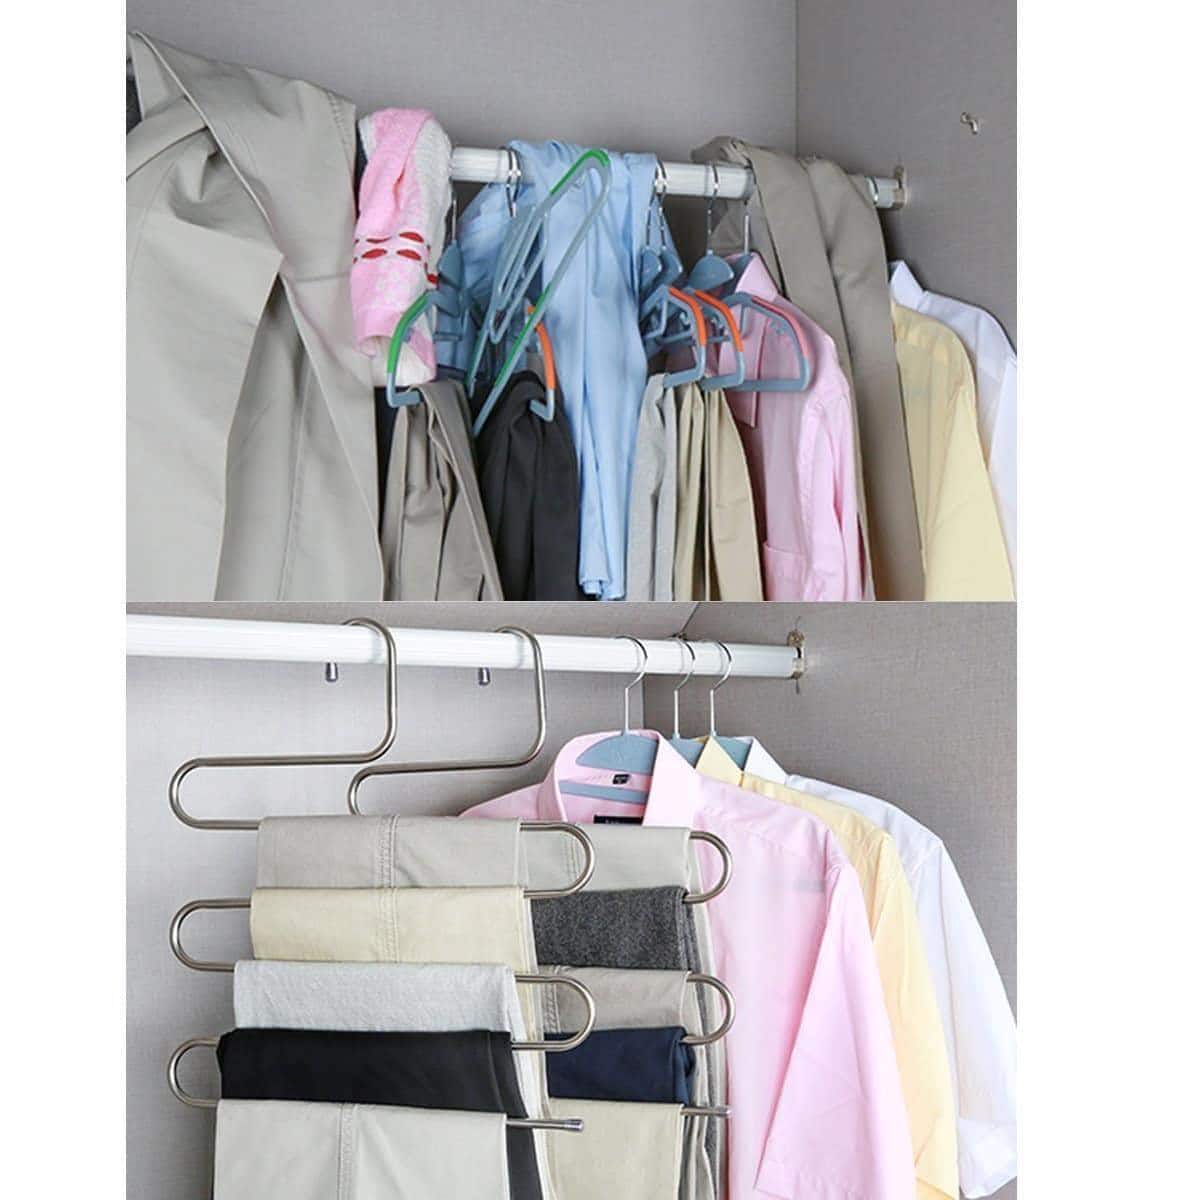 Storage doiown pants hangers s shape stainless steel clothes hangers space saving hangers closet organizer for pants jeans scarf5 layers 10pcs